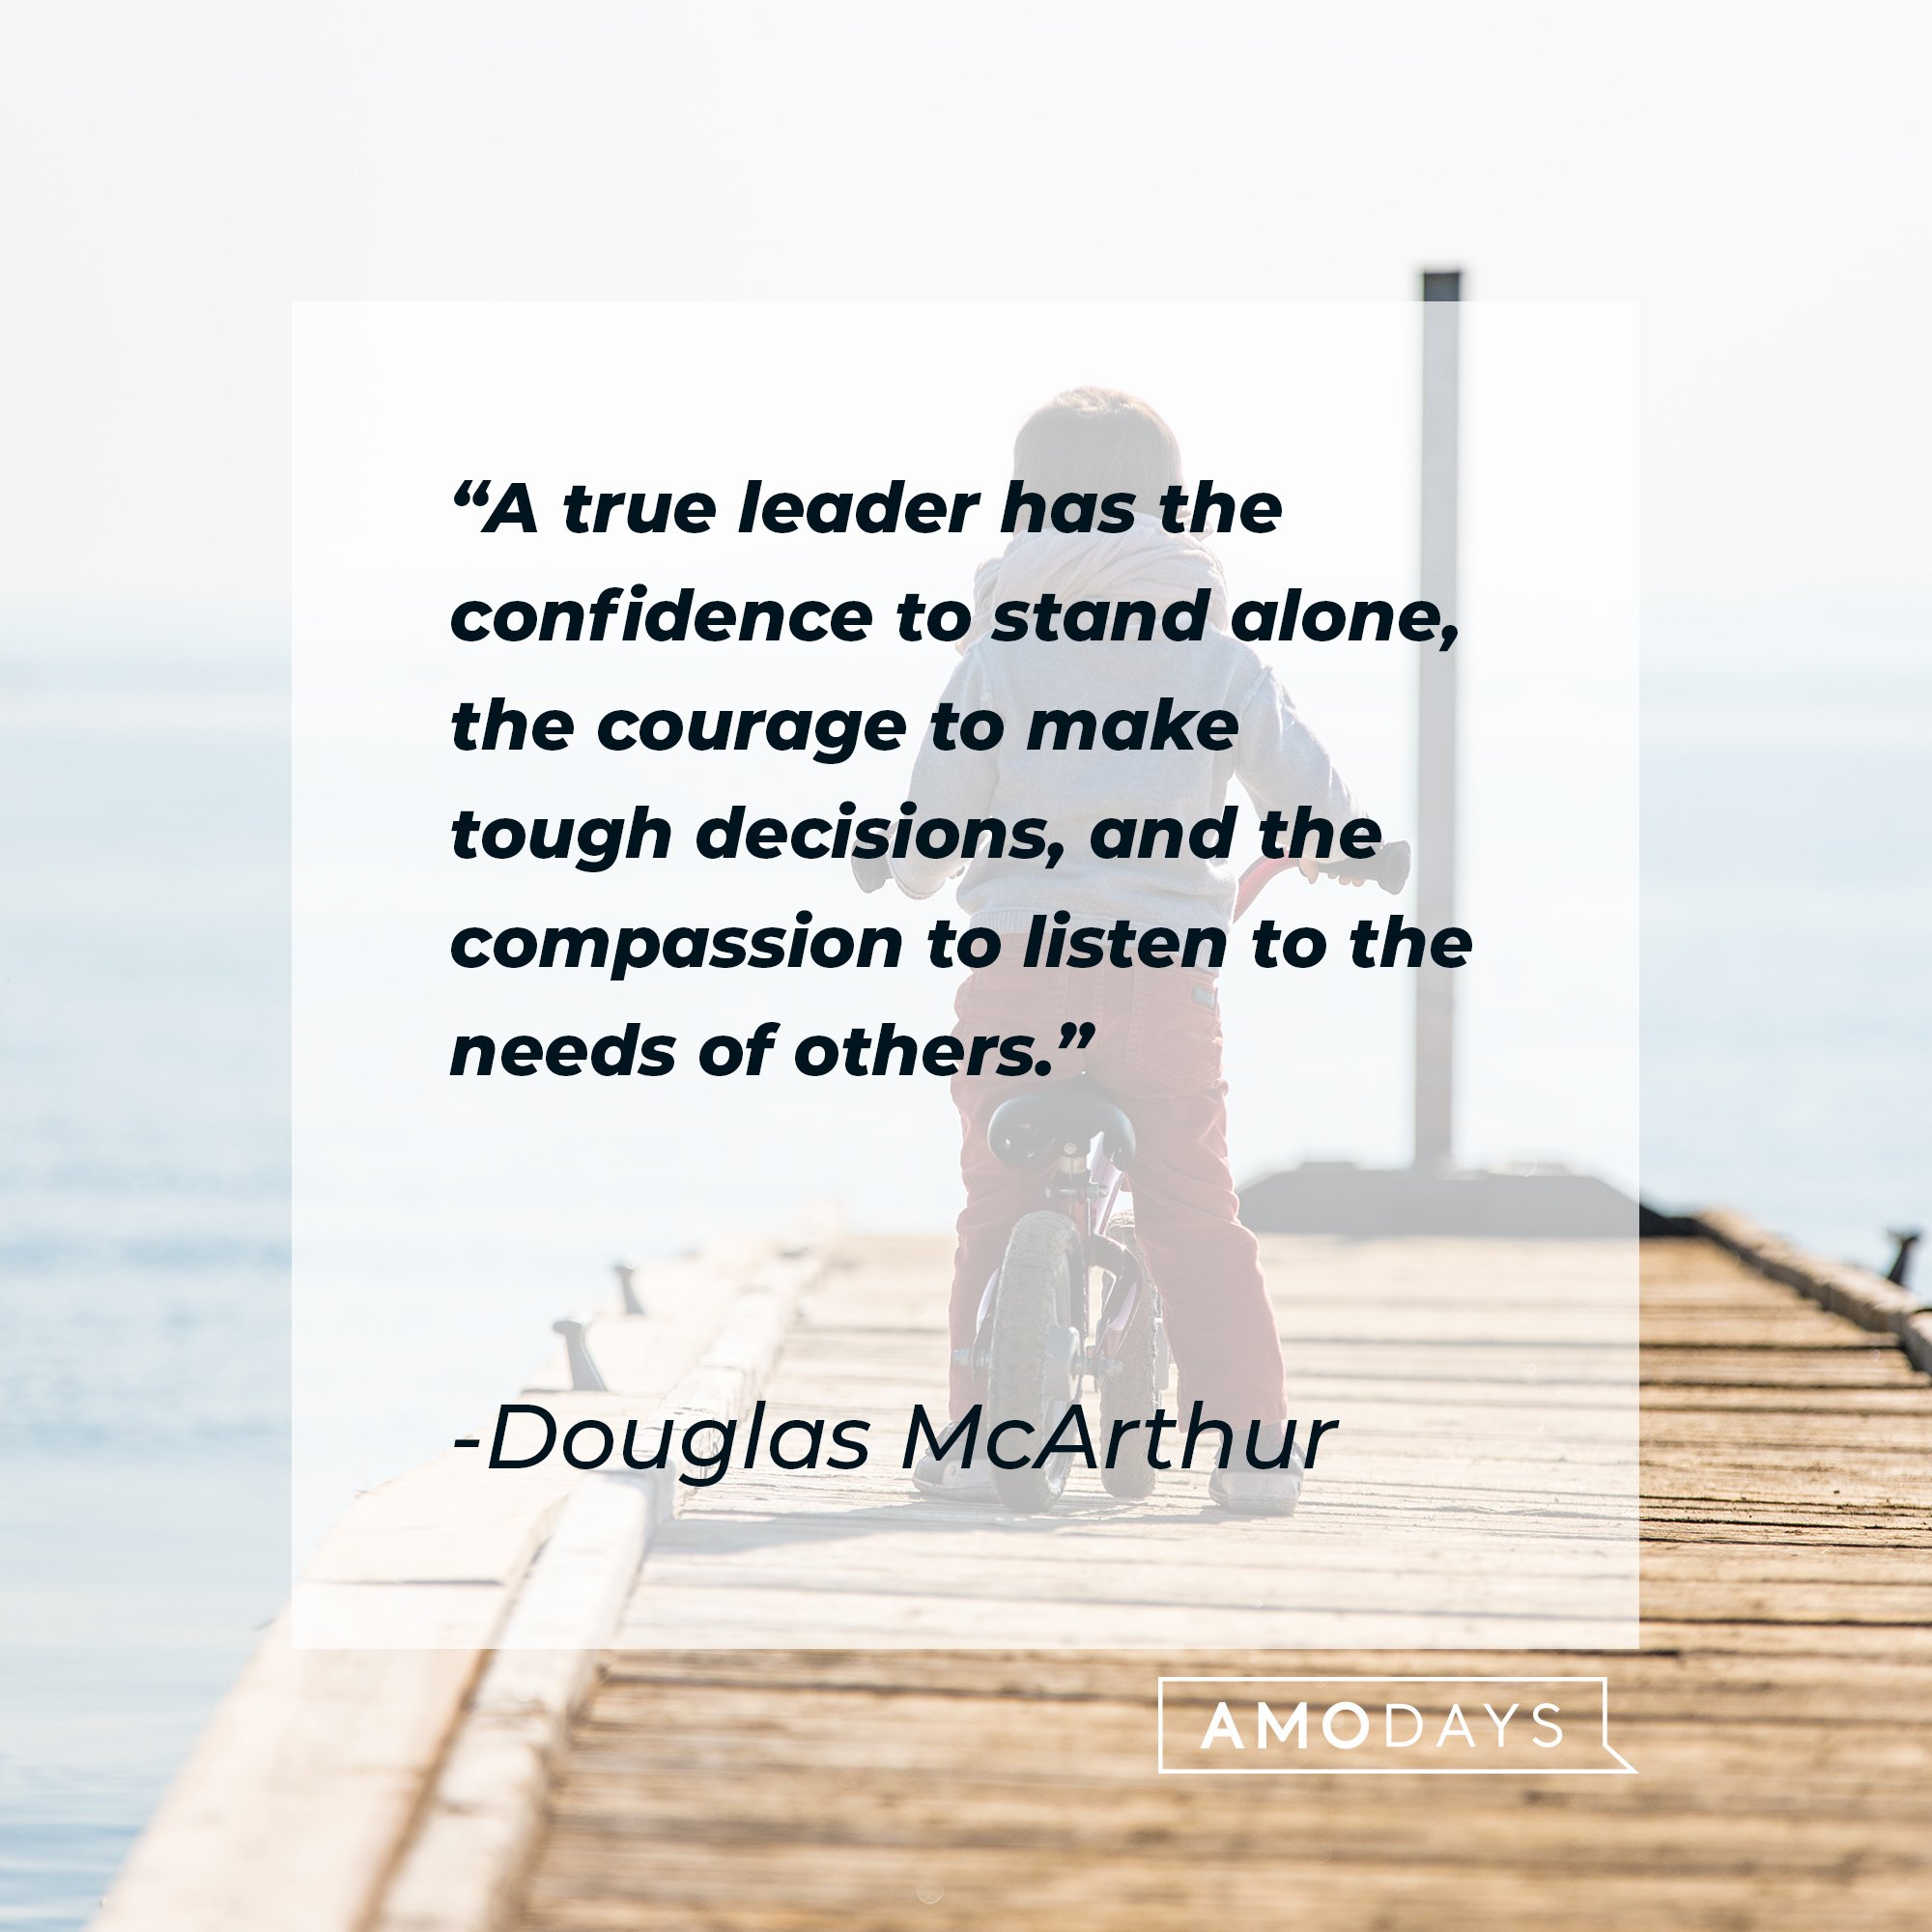 Douglas McArthur's quote: "A true leader has the confidence to stand alone, the courage to make tough decisions, and the compassion to listen to the needs of others." | Image: AmoDays